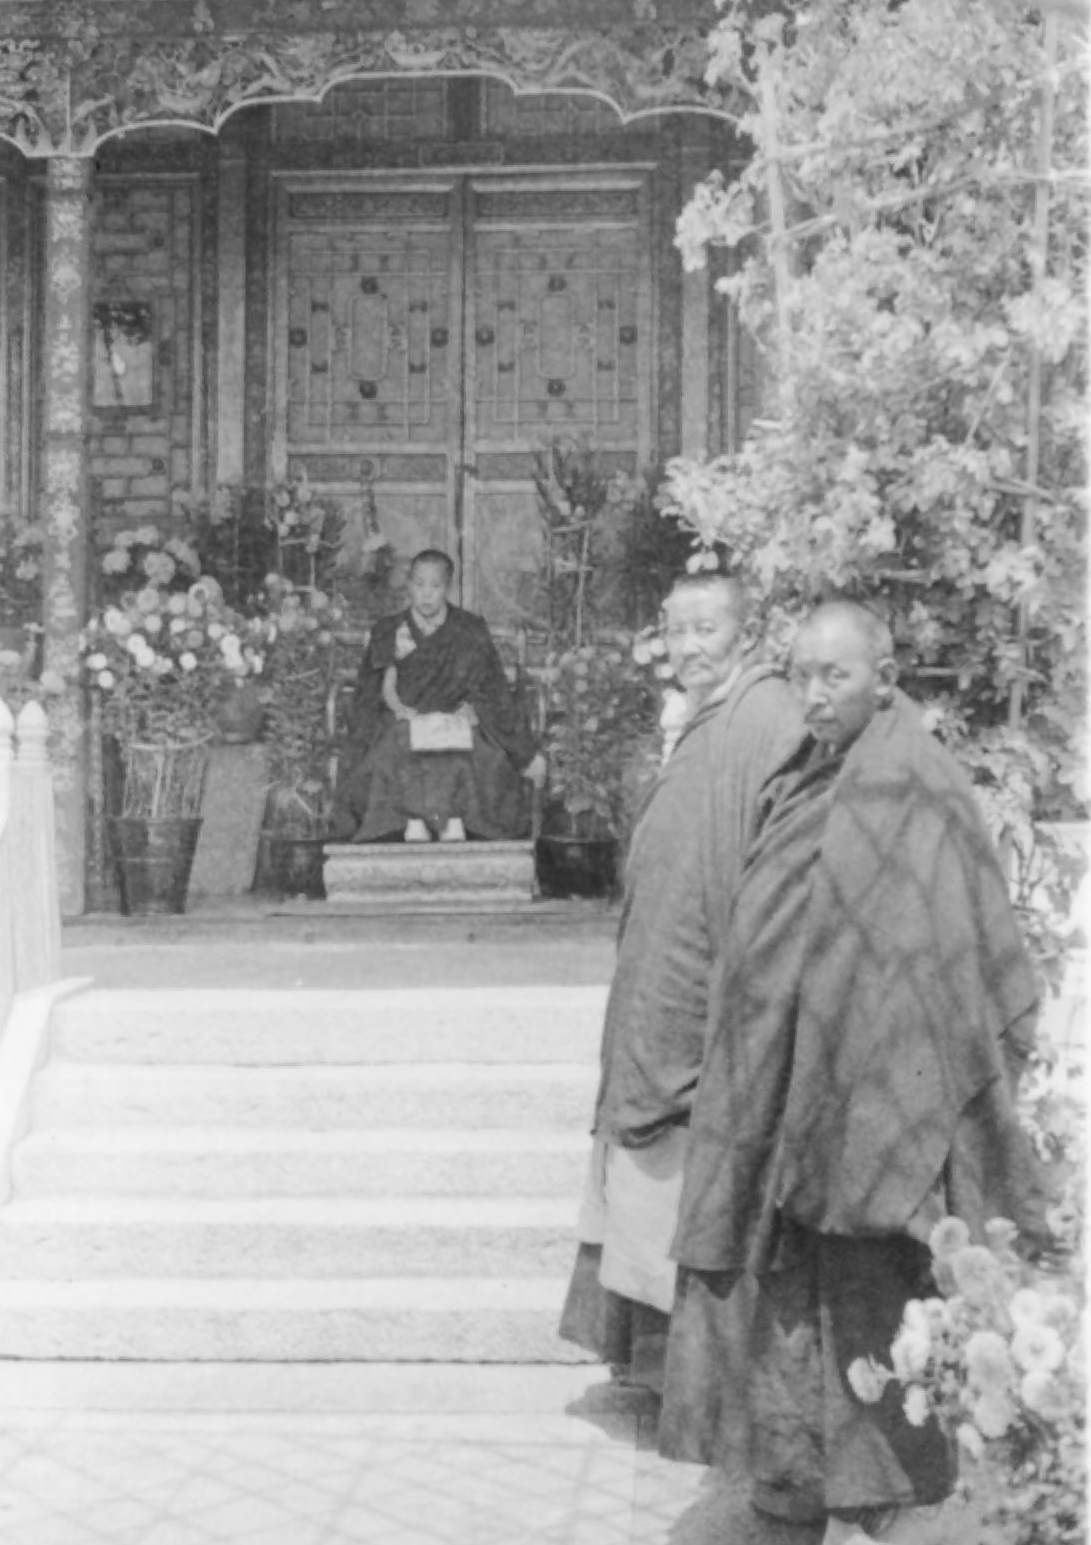 The Dalai Lama With Two of His Priest Attendants.